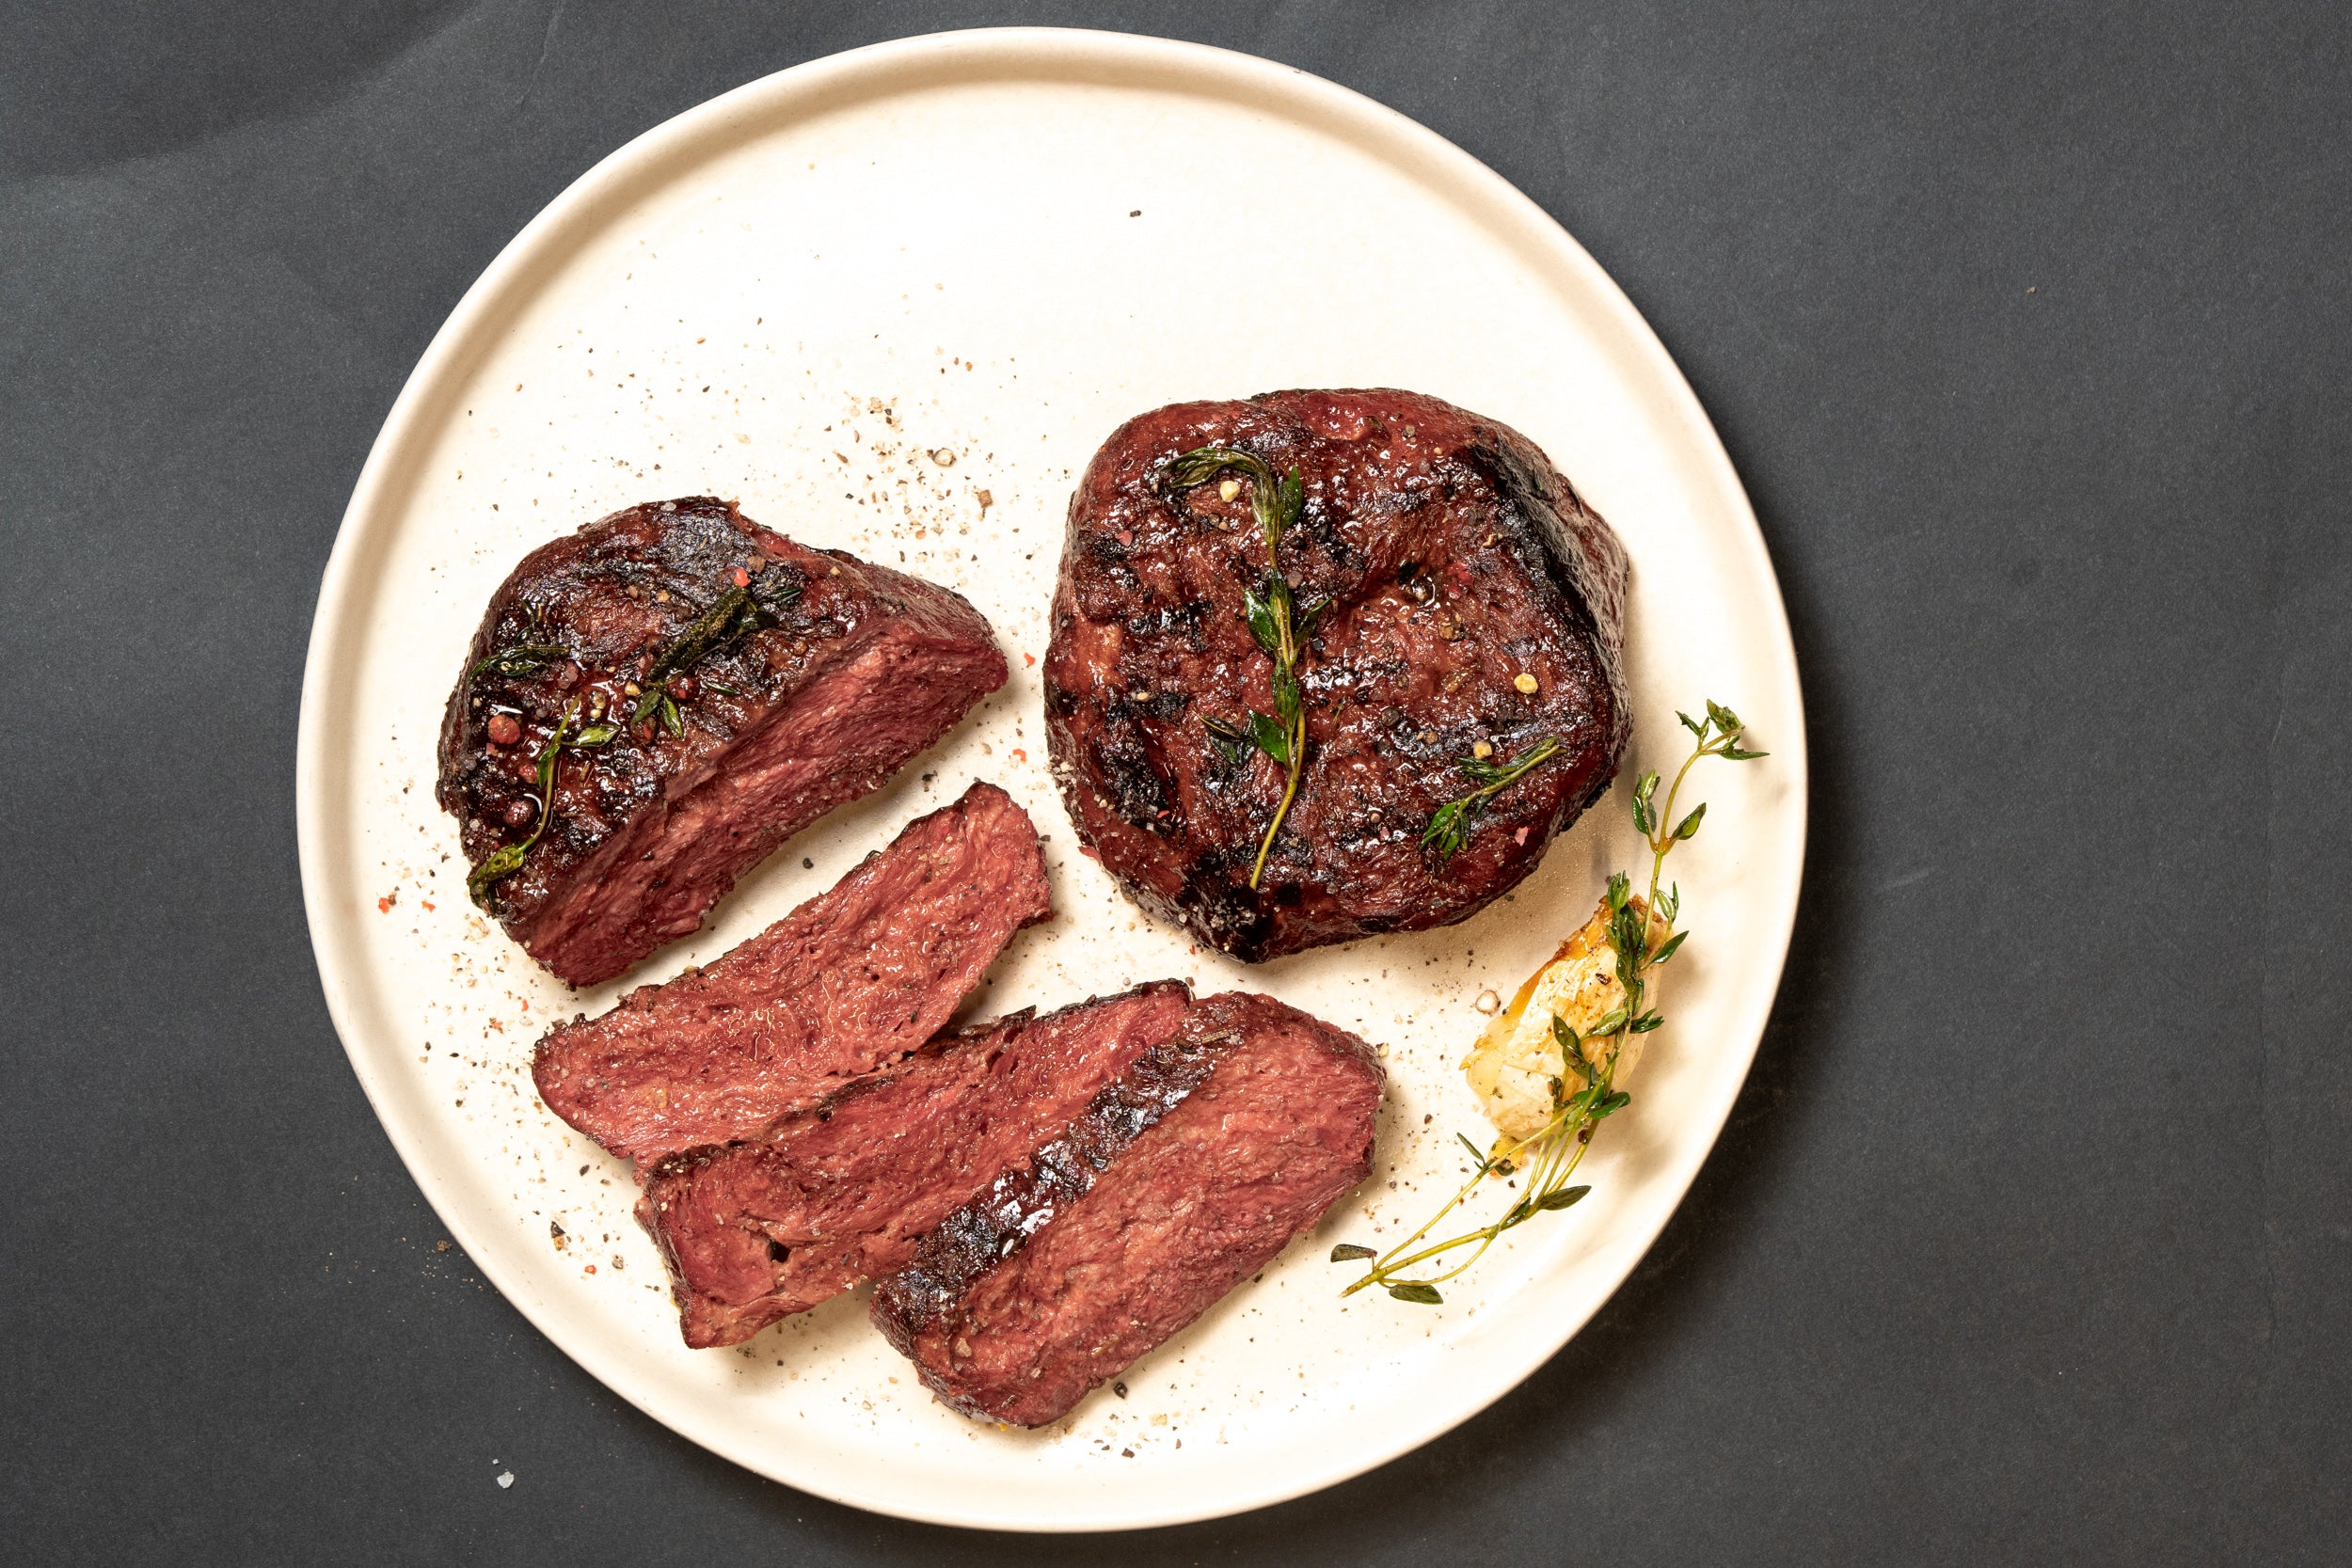 Planted launches the first fermented steak of its kind and expands production